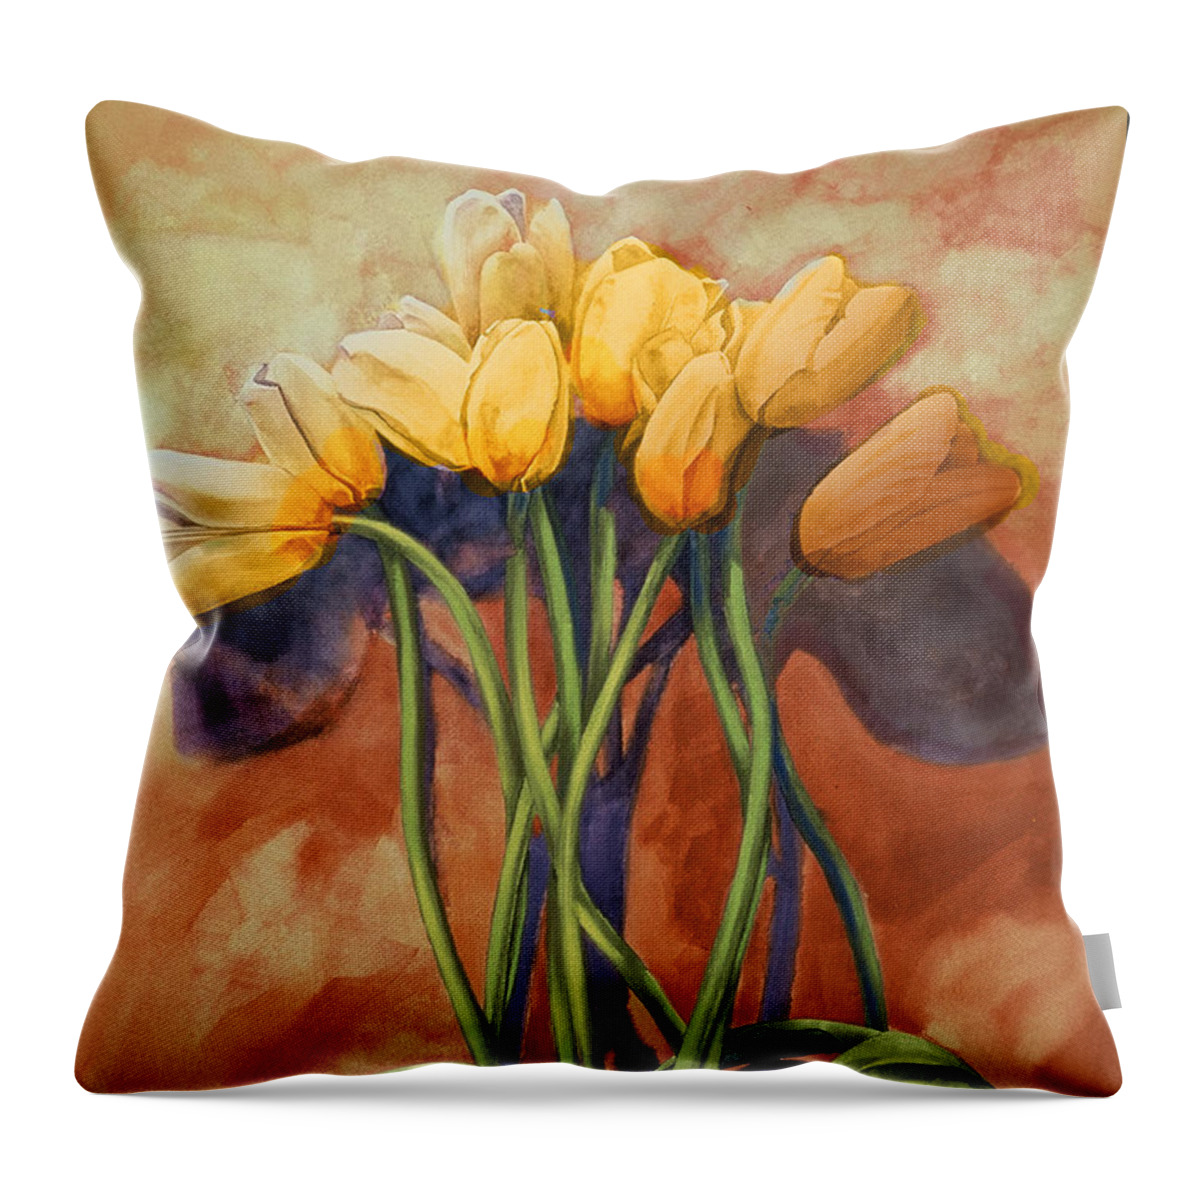 Yellow Tulips Throw Pillow featuring the painting Tulips by Cathy Locke